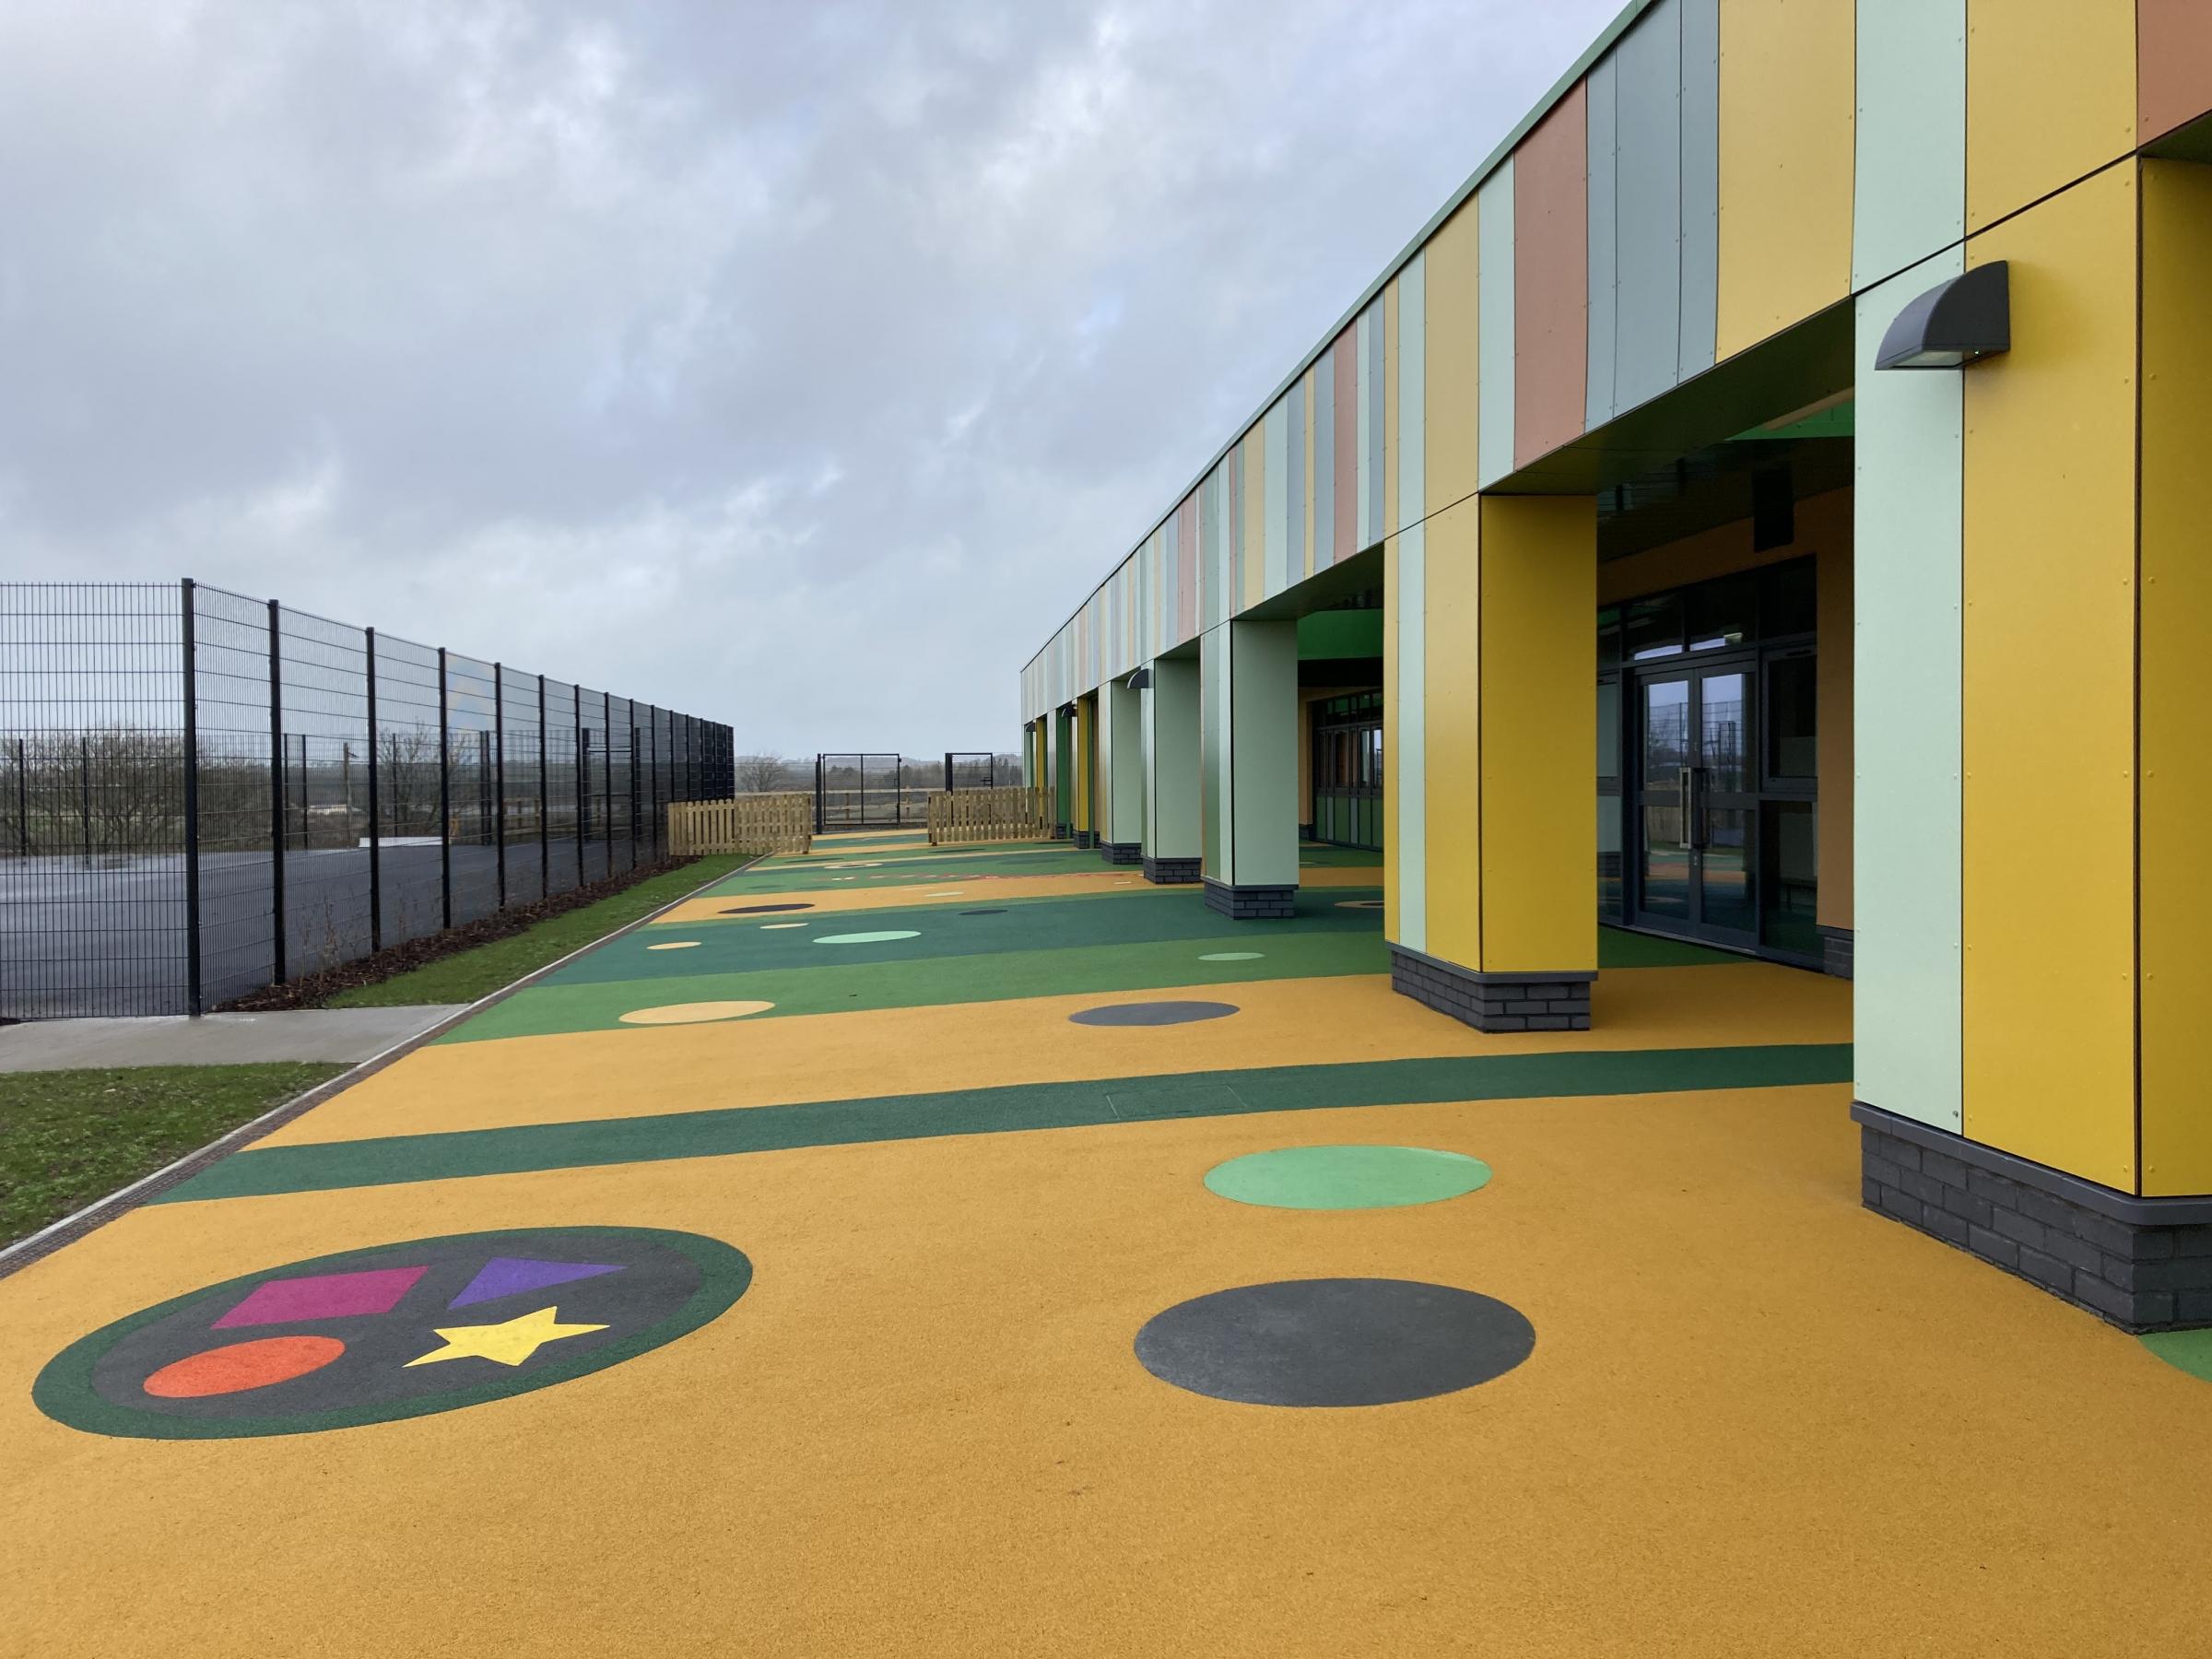 Colourful outside area at the new Ysgol Corn Hir (Image Dale Sprodgeon)